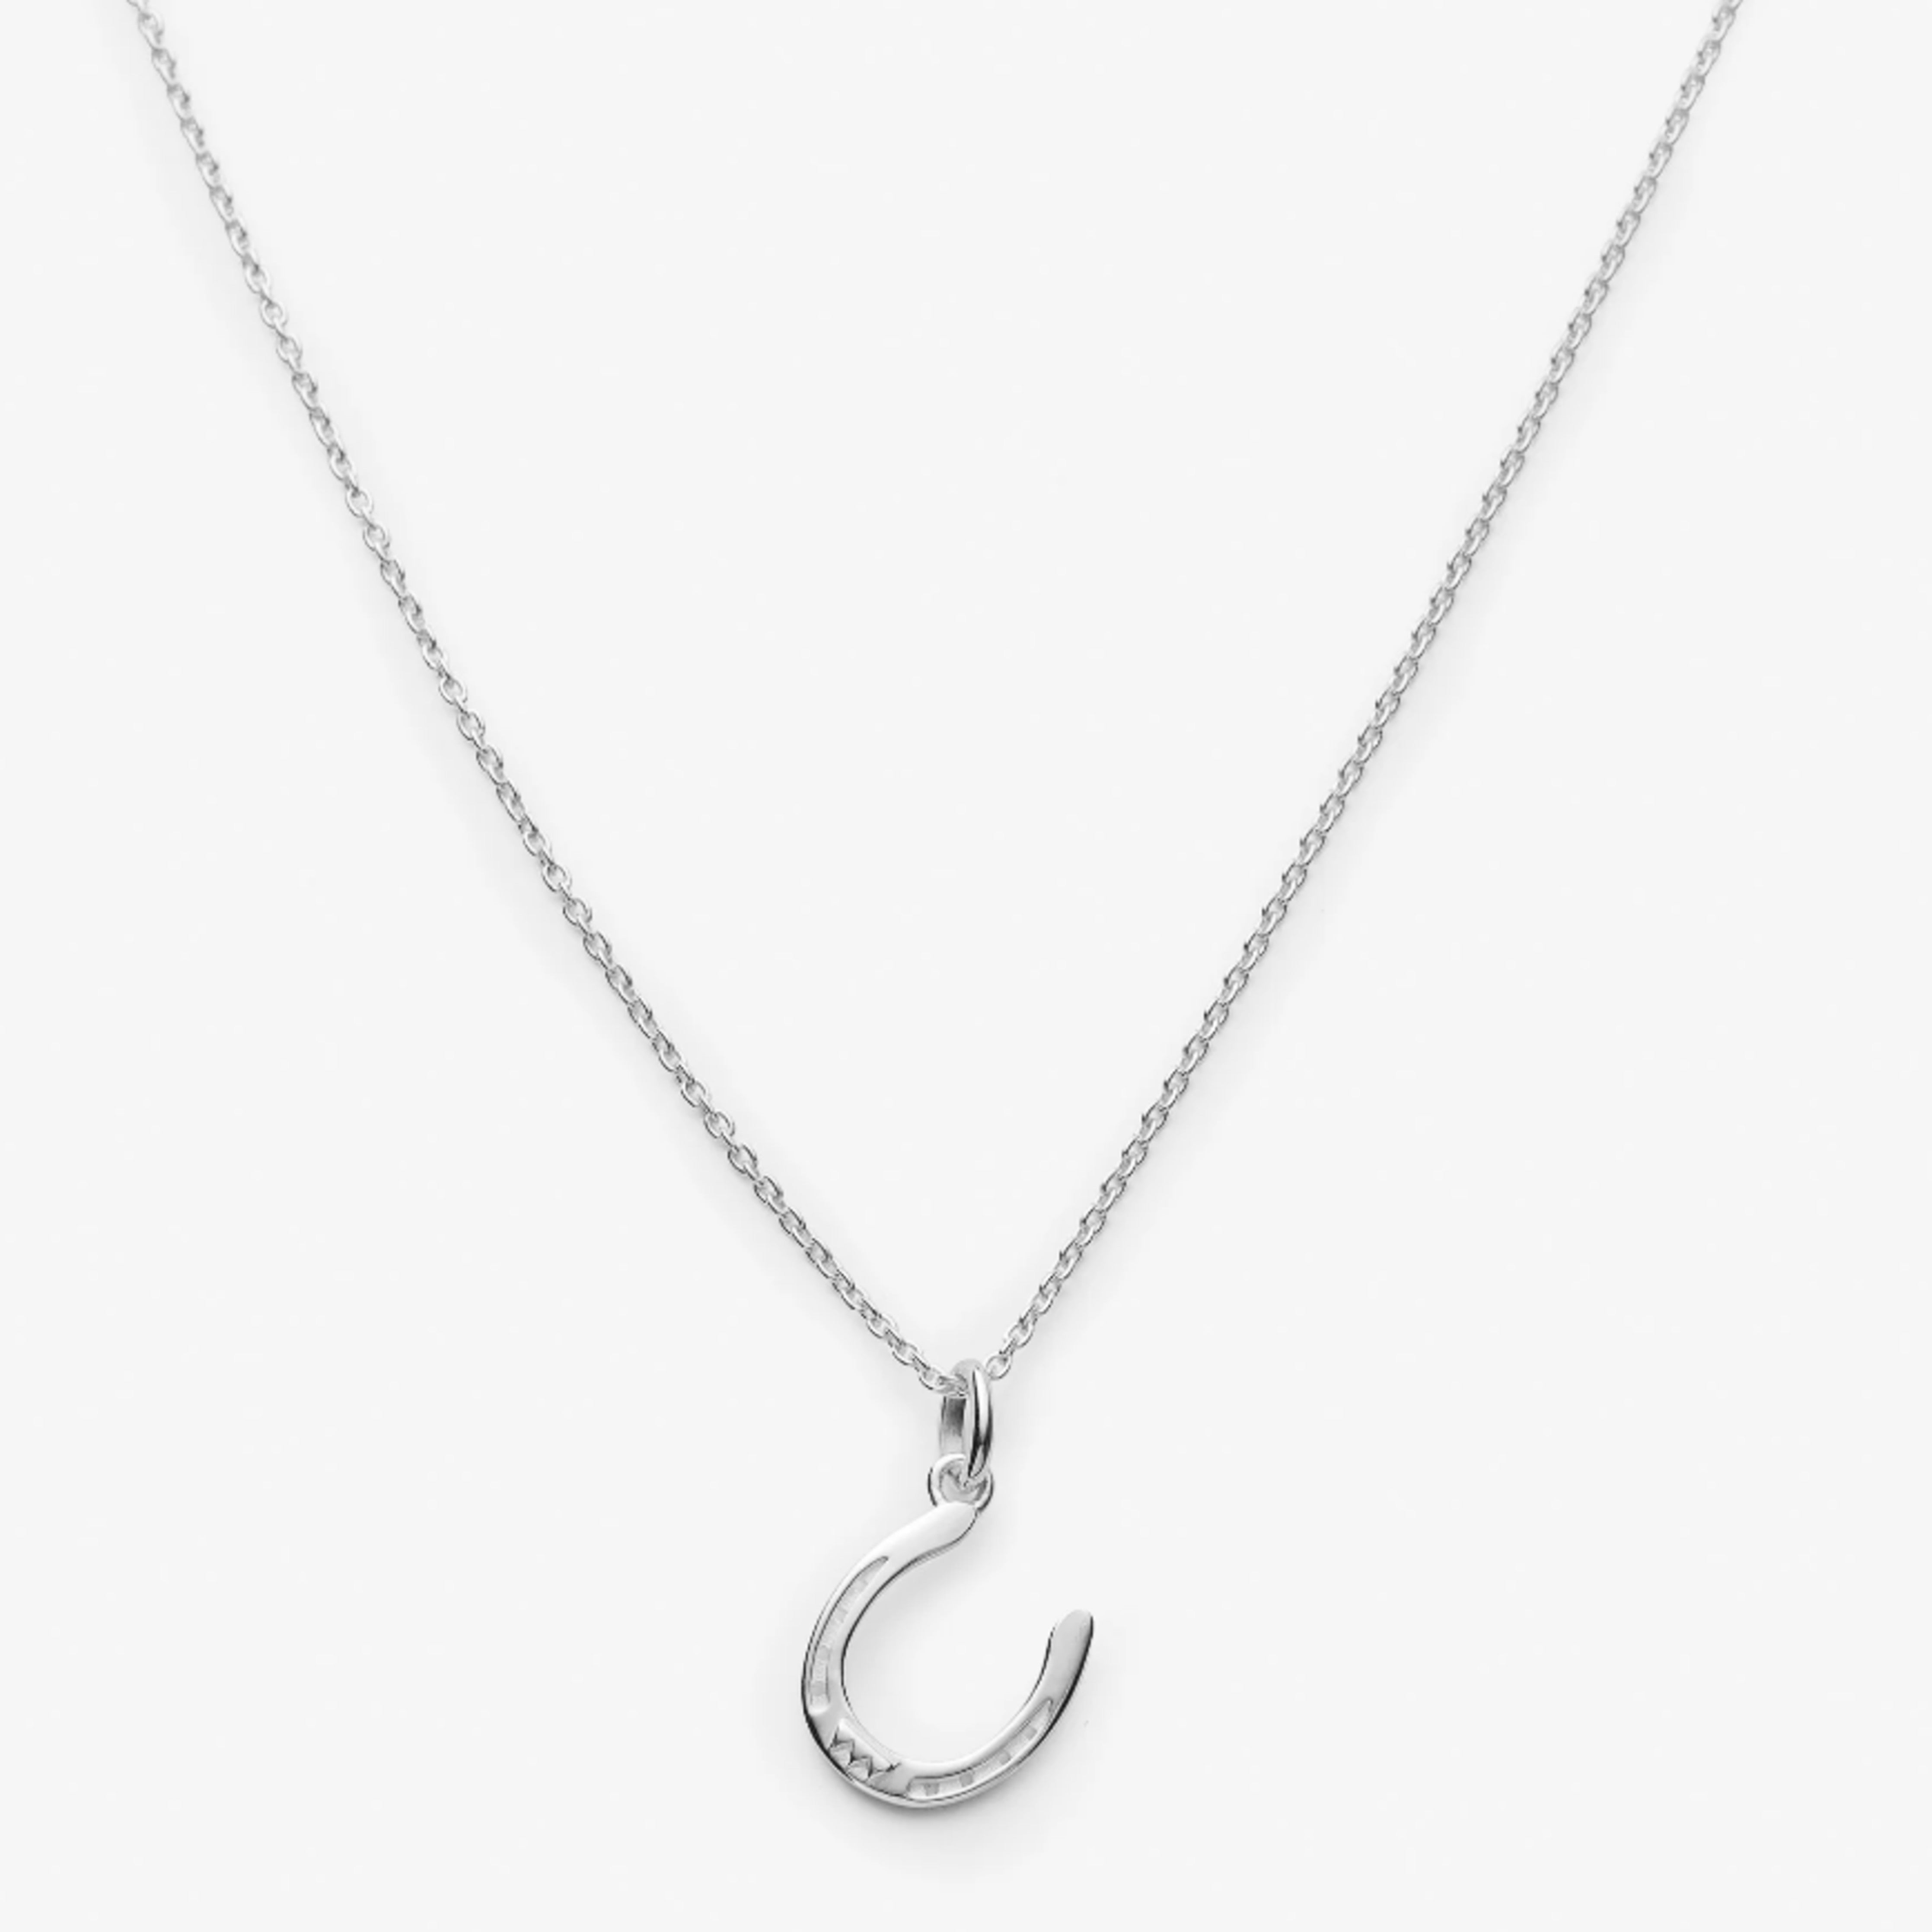 Get the Gallop Lucky Horseshoe Necklace